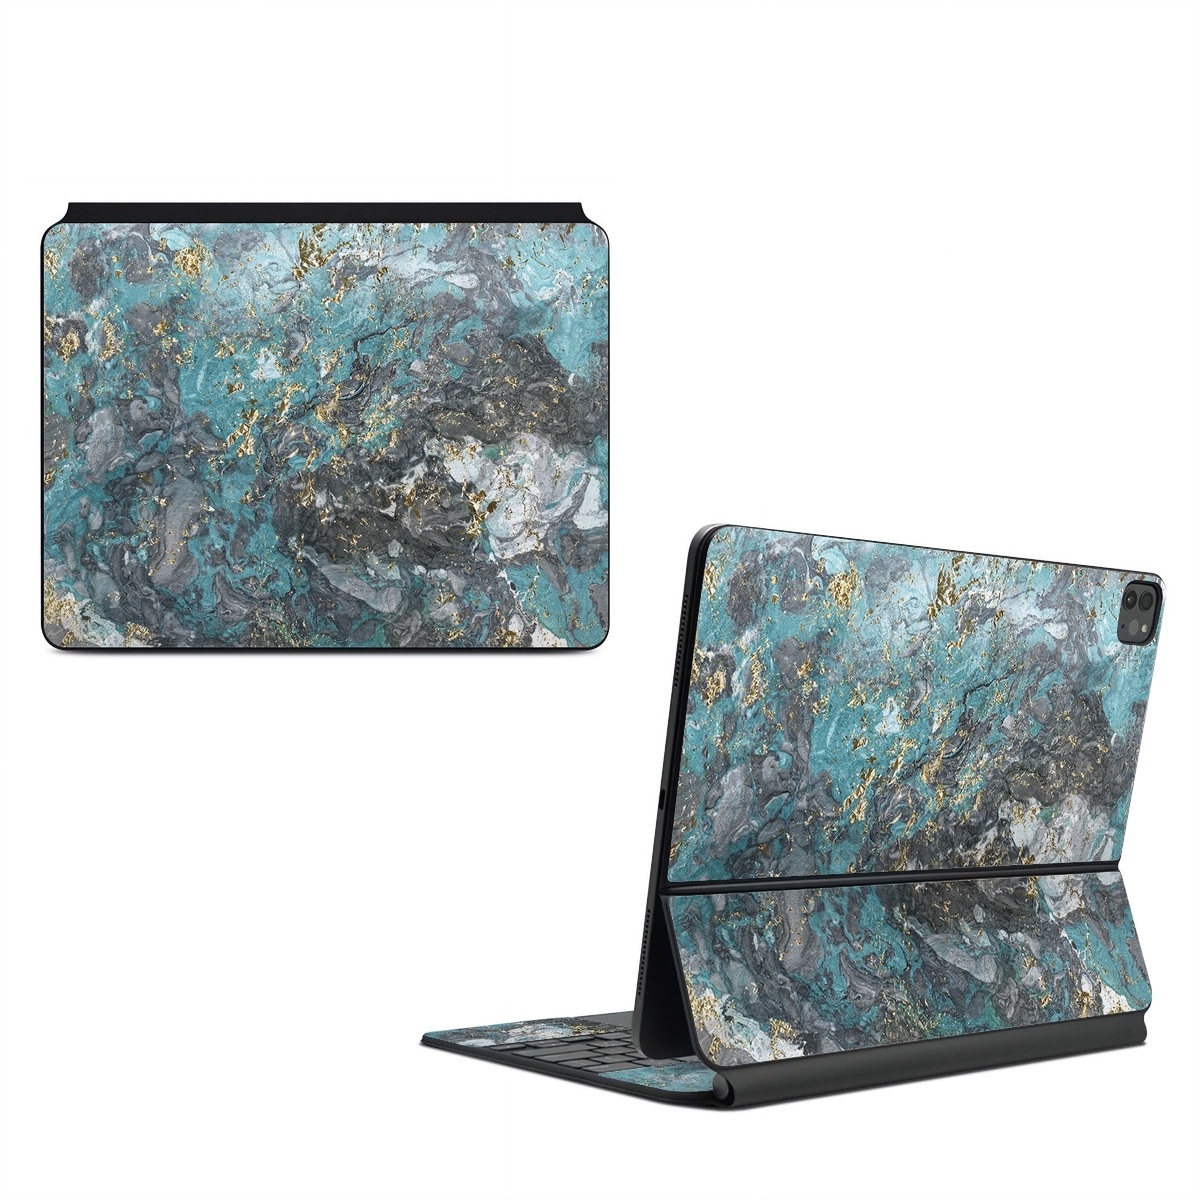 Magic Keyboard for iPad Series Skin design of Blue, Turquoise, Green, Aqua, Teal, Geology, Rock, Painting, Pattern, with black, white, gray, green, blue colors